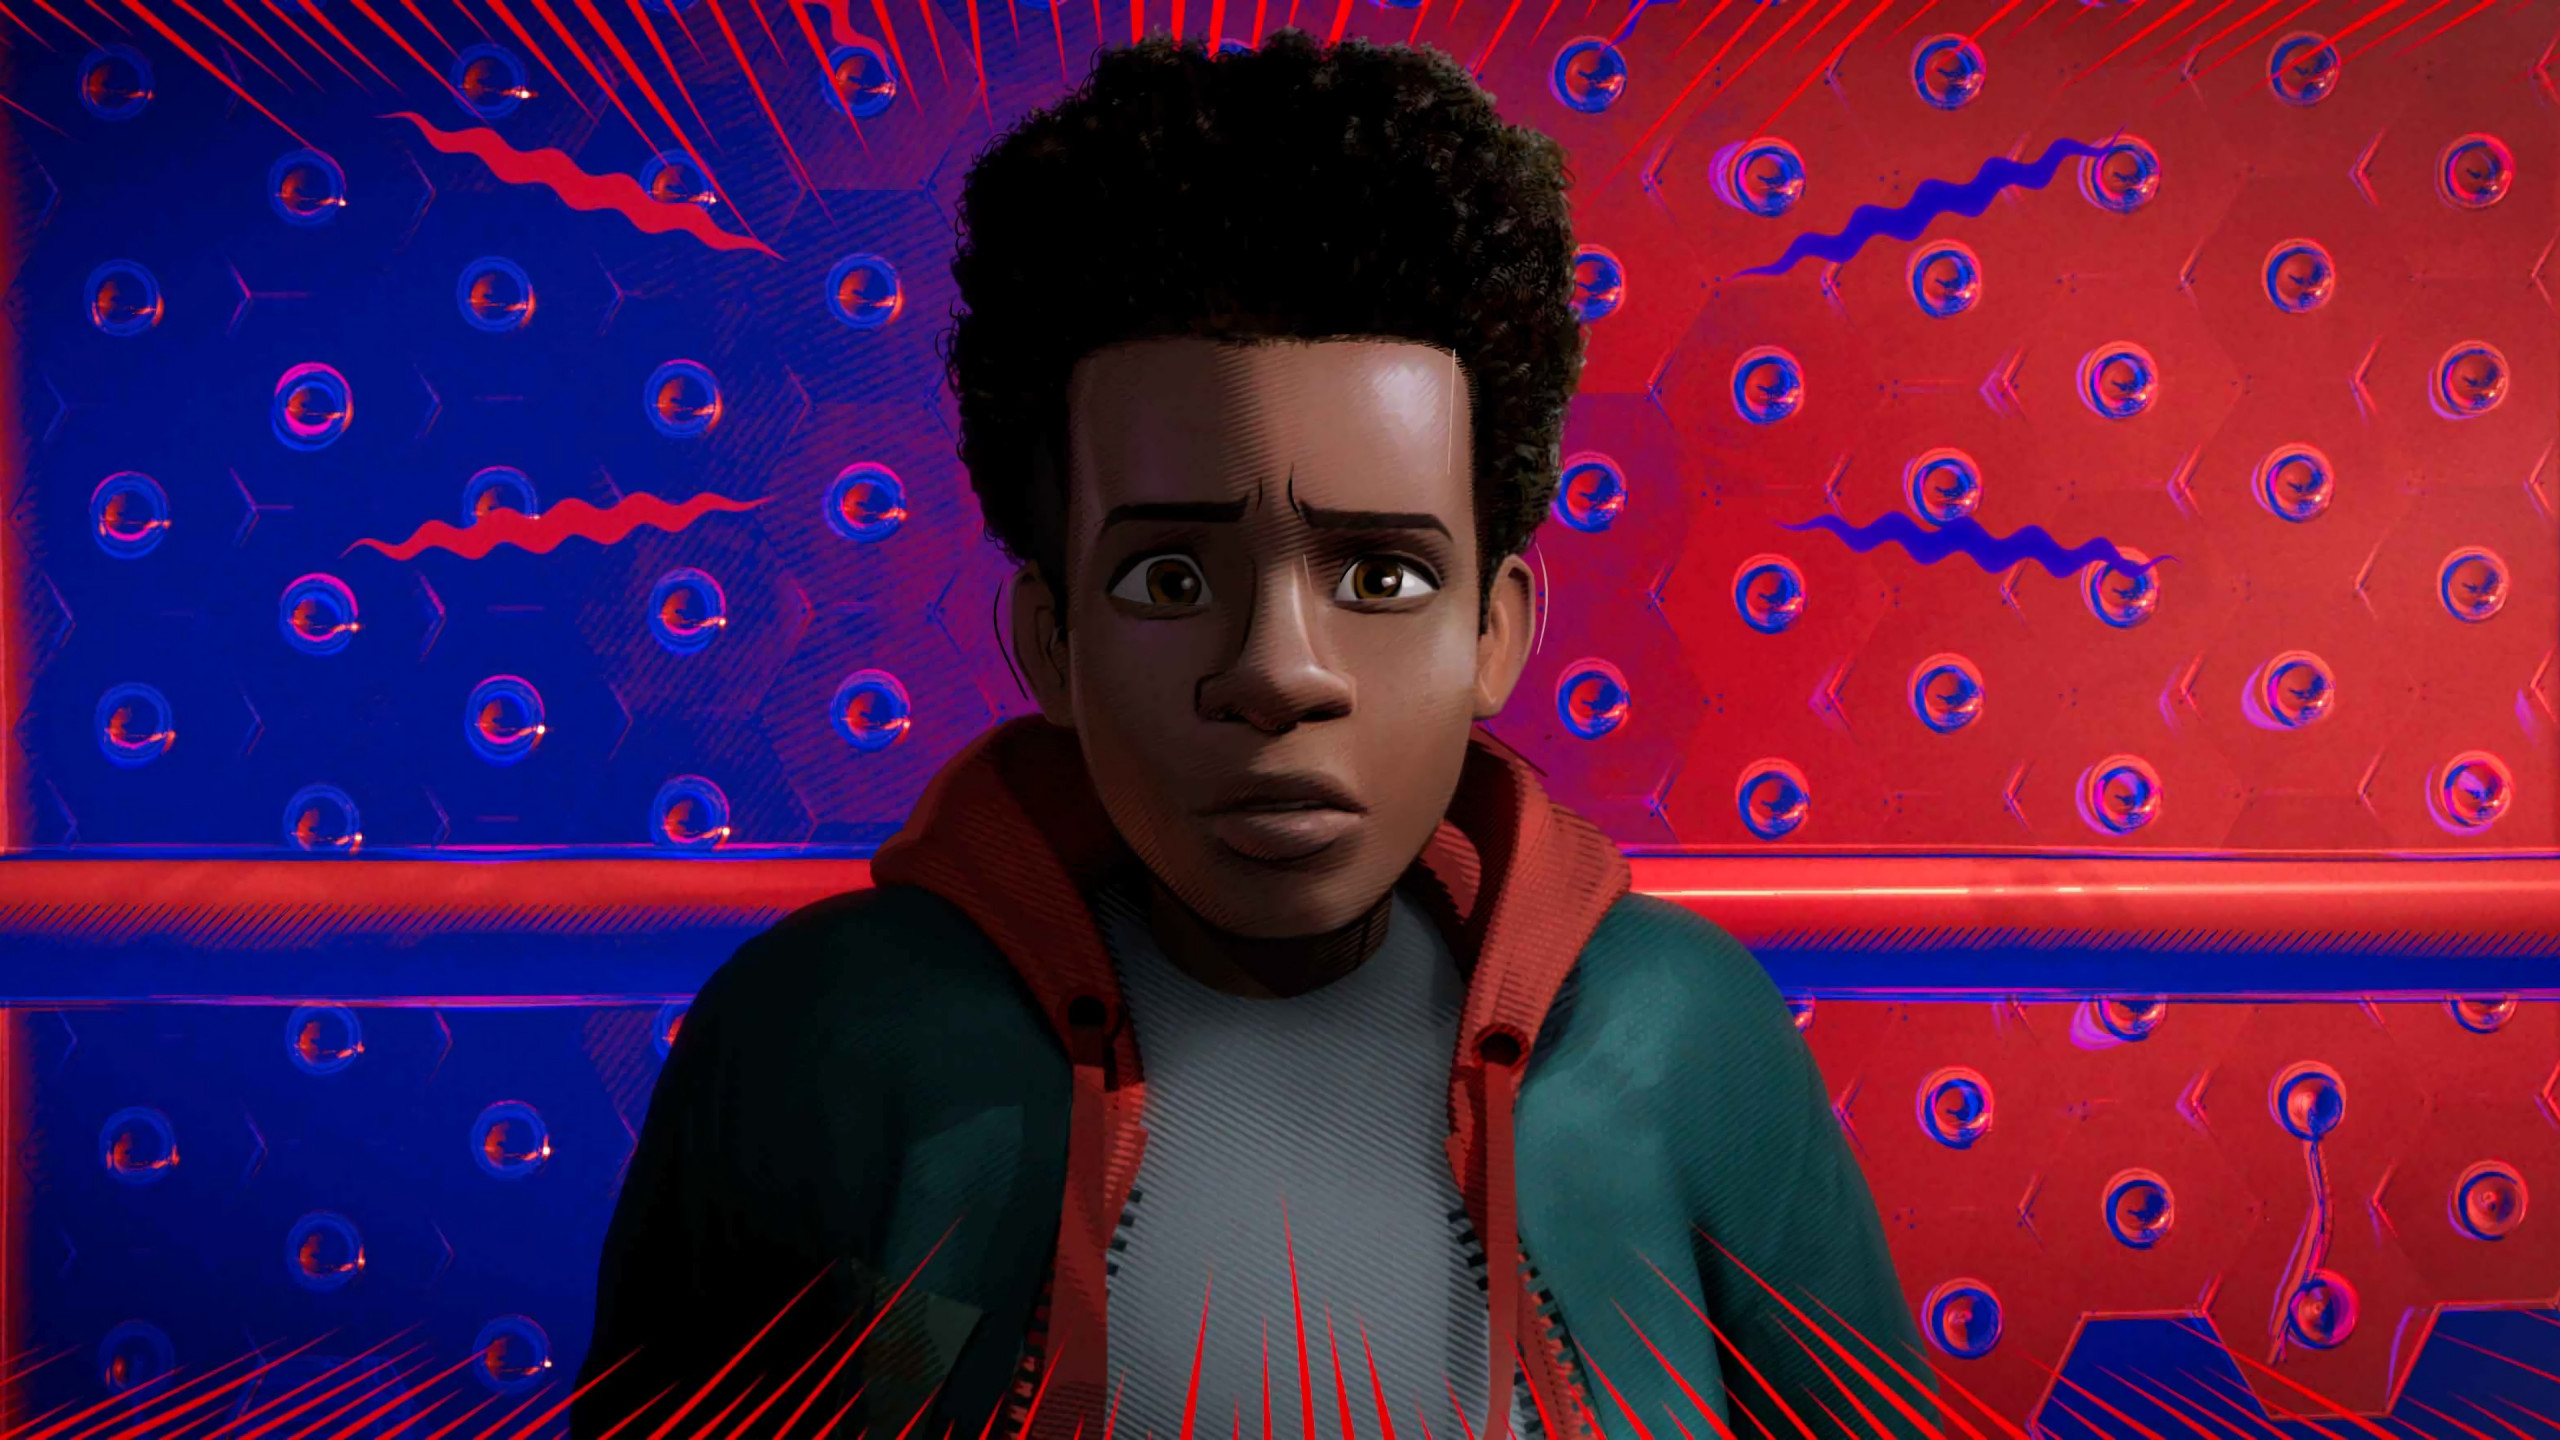 586774 1920x1080 SpiderMan Into The SpiderVerse SpiderMan wallpaper  JPG  Rare Gallery HD Wallpapers